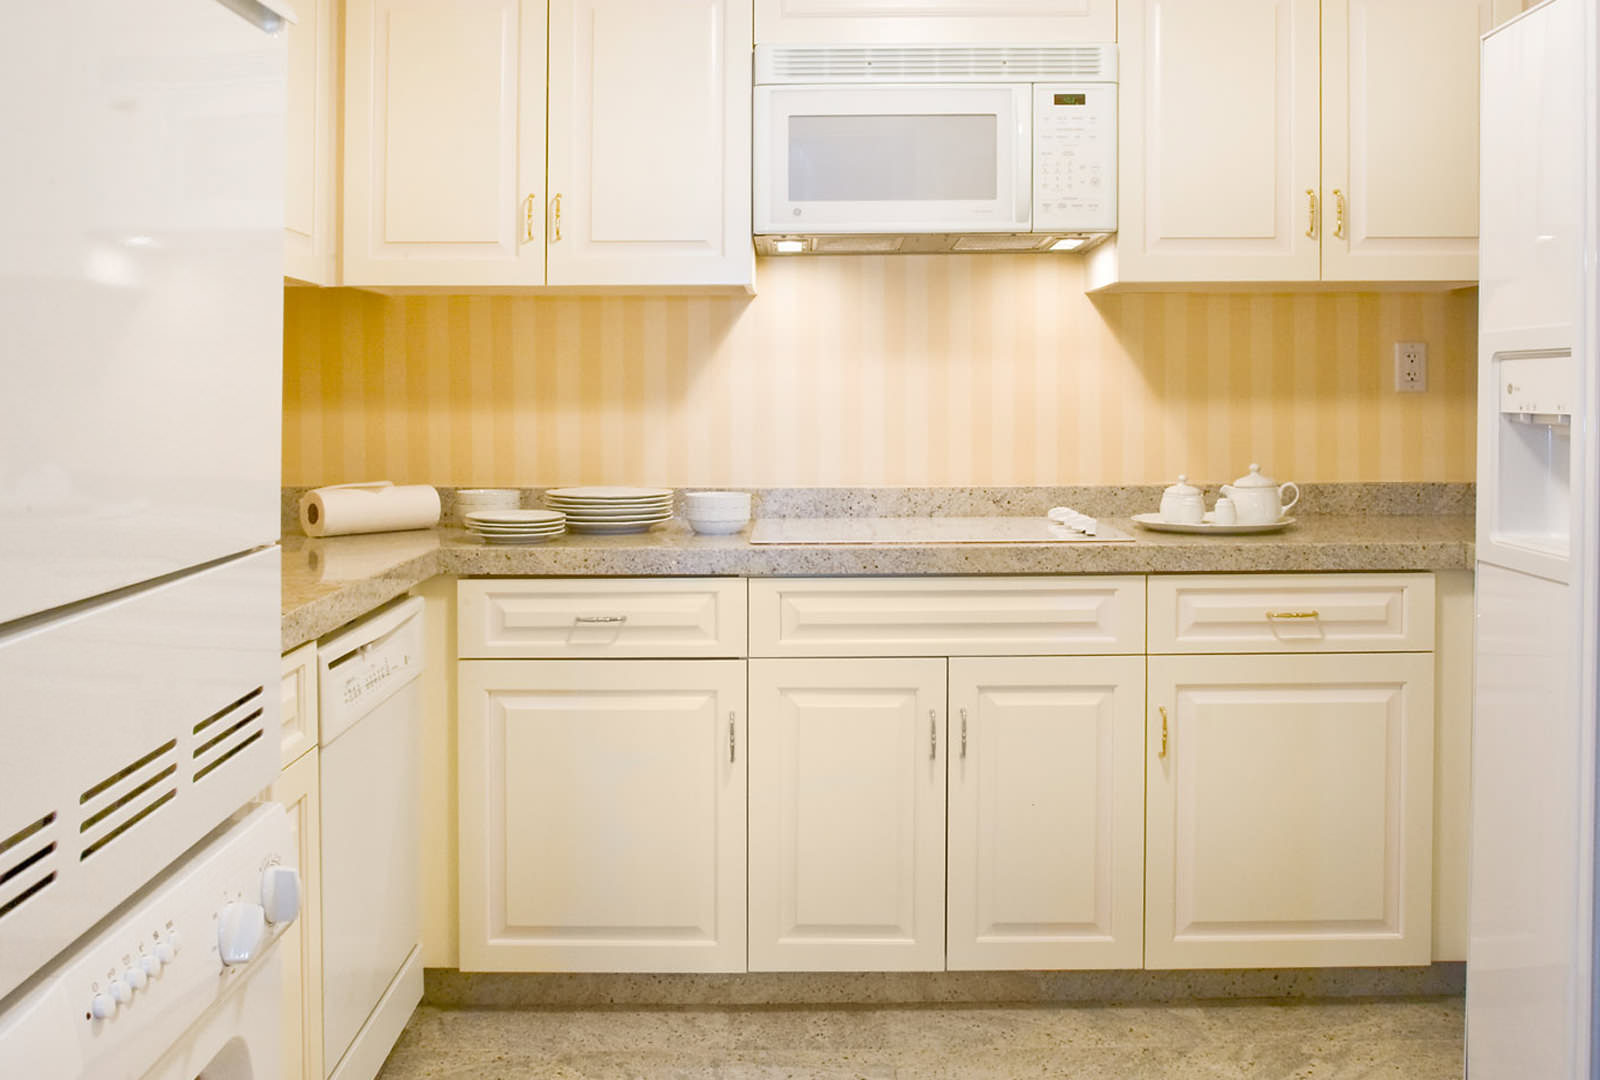 Grand America Hotel kitchen suite with white cabinets and white appliances